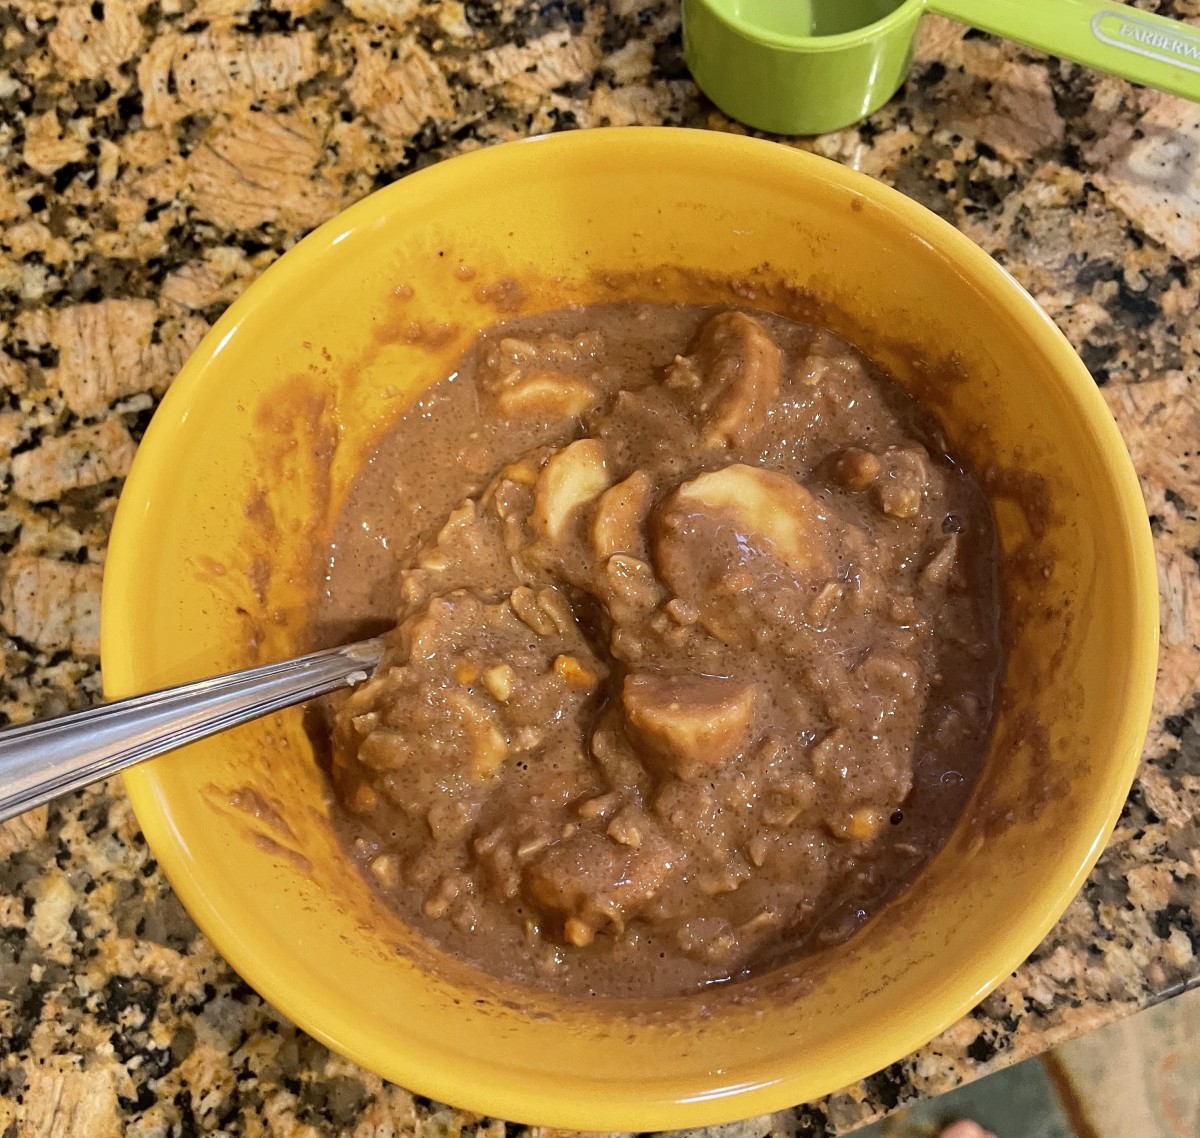 This yummy breakfast combines chocolate, peanut butter, banana, oatmeal, and Malt-O-Meal in one yummy (and healthy!) breakfast bowl.